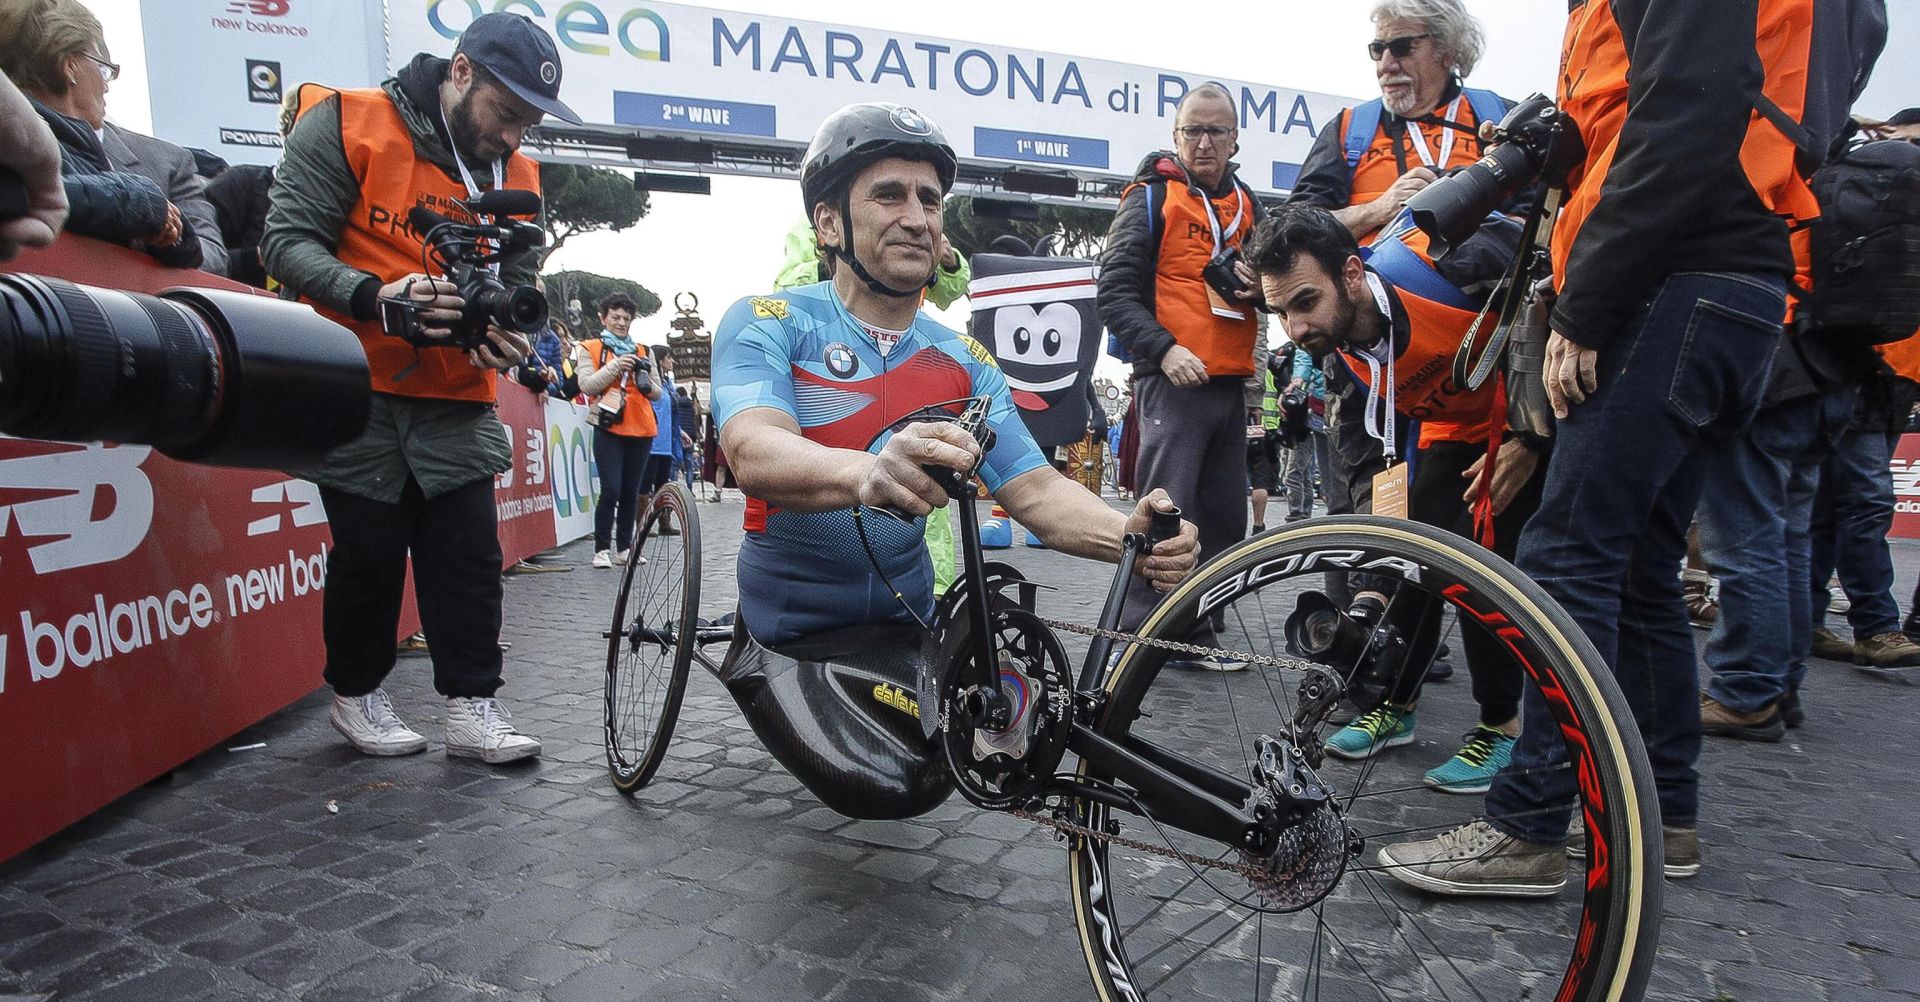 epa08497149 (FILE) - Italian professional racing driver and paracyclist Alex Zanardi prepares for the start of the 23rd edition of the Rome Marathon (Maratona die Roma) in the centre of Rome, Italy, 02 April 2017 (reissued 20 June 2020). Reports on 20 June 2020 state four-time paralympic champion and former Formula One driver Alex Zanardi was involved in a serious road accident on 19 June 2020 in the province of Siena while taking part in a race on his handbike during one of the stages of the relay of Obiettivo tricolore. Zinardi underwent a brain surgery after suffering a severe cranial trauma and is in serious condition, according to reports.  EPA/GIUSEPPE LAMI *** Local Caption *** 53432249